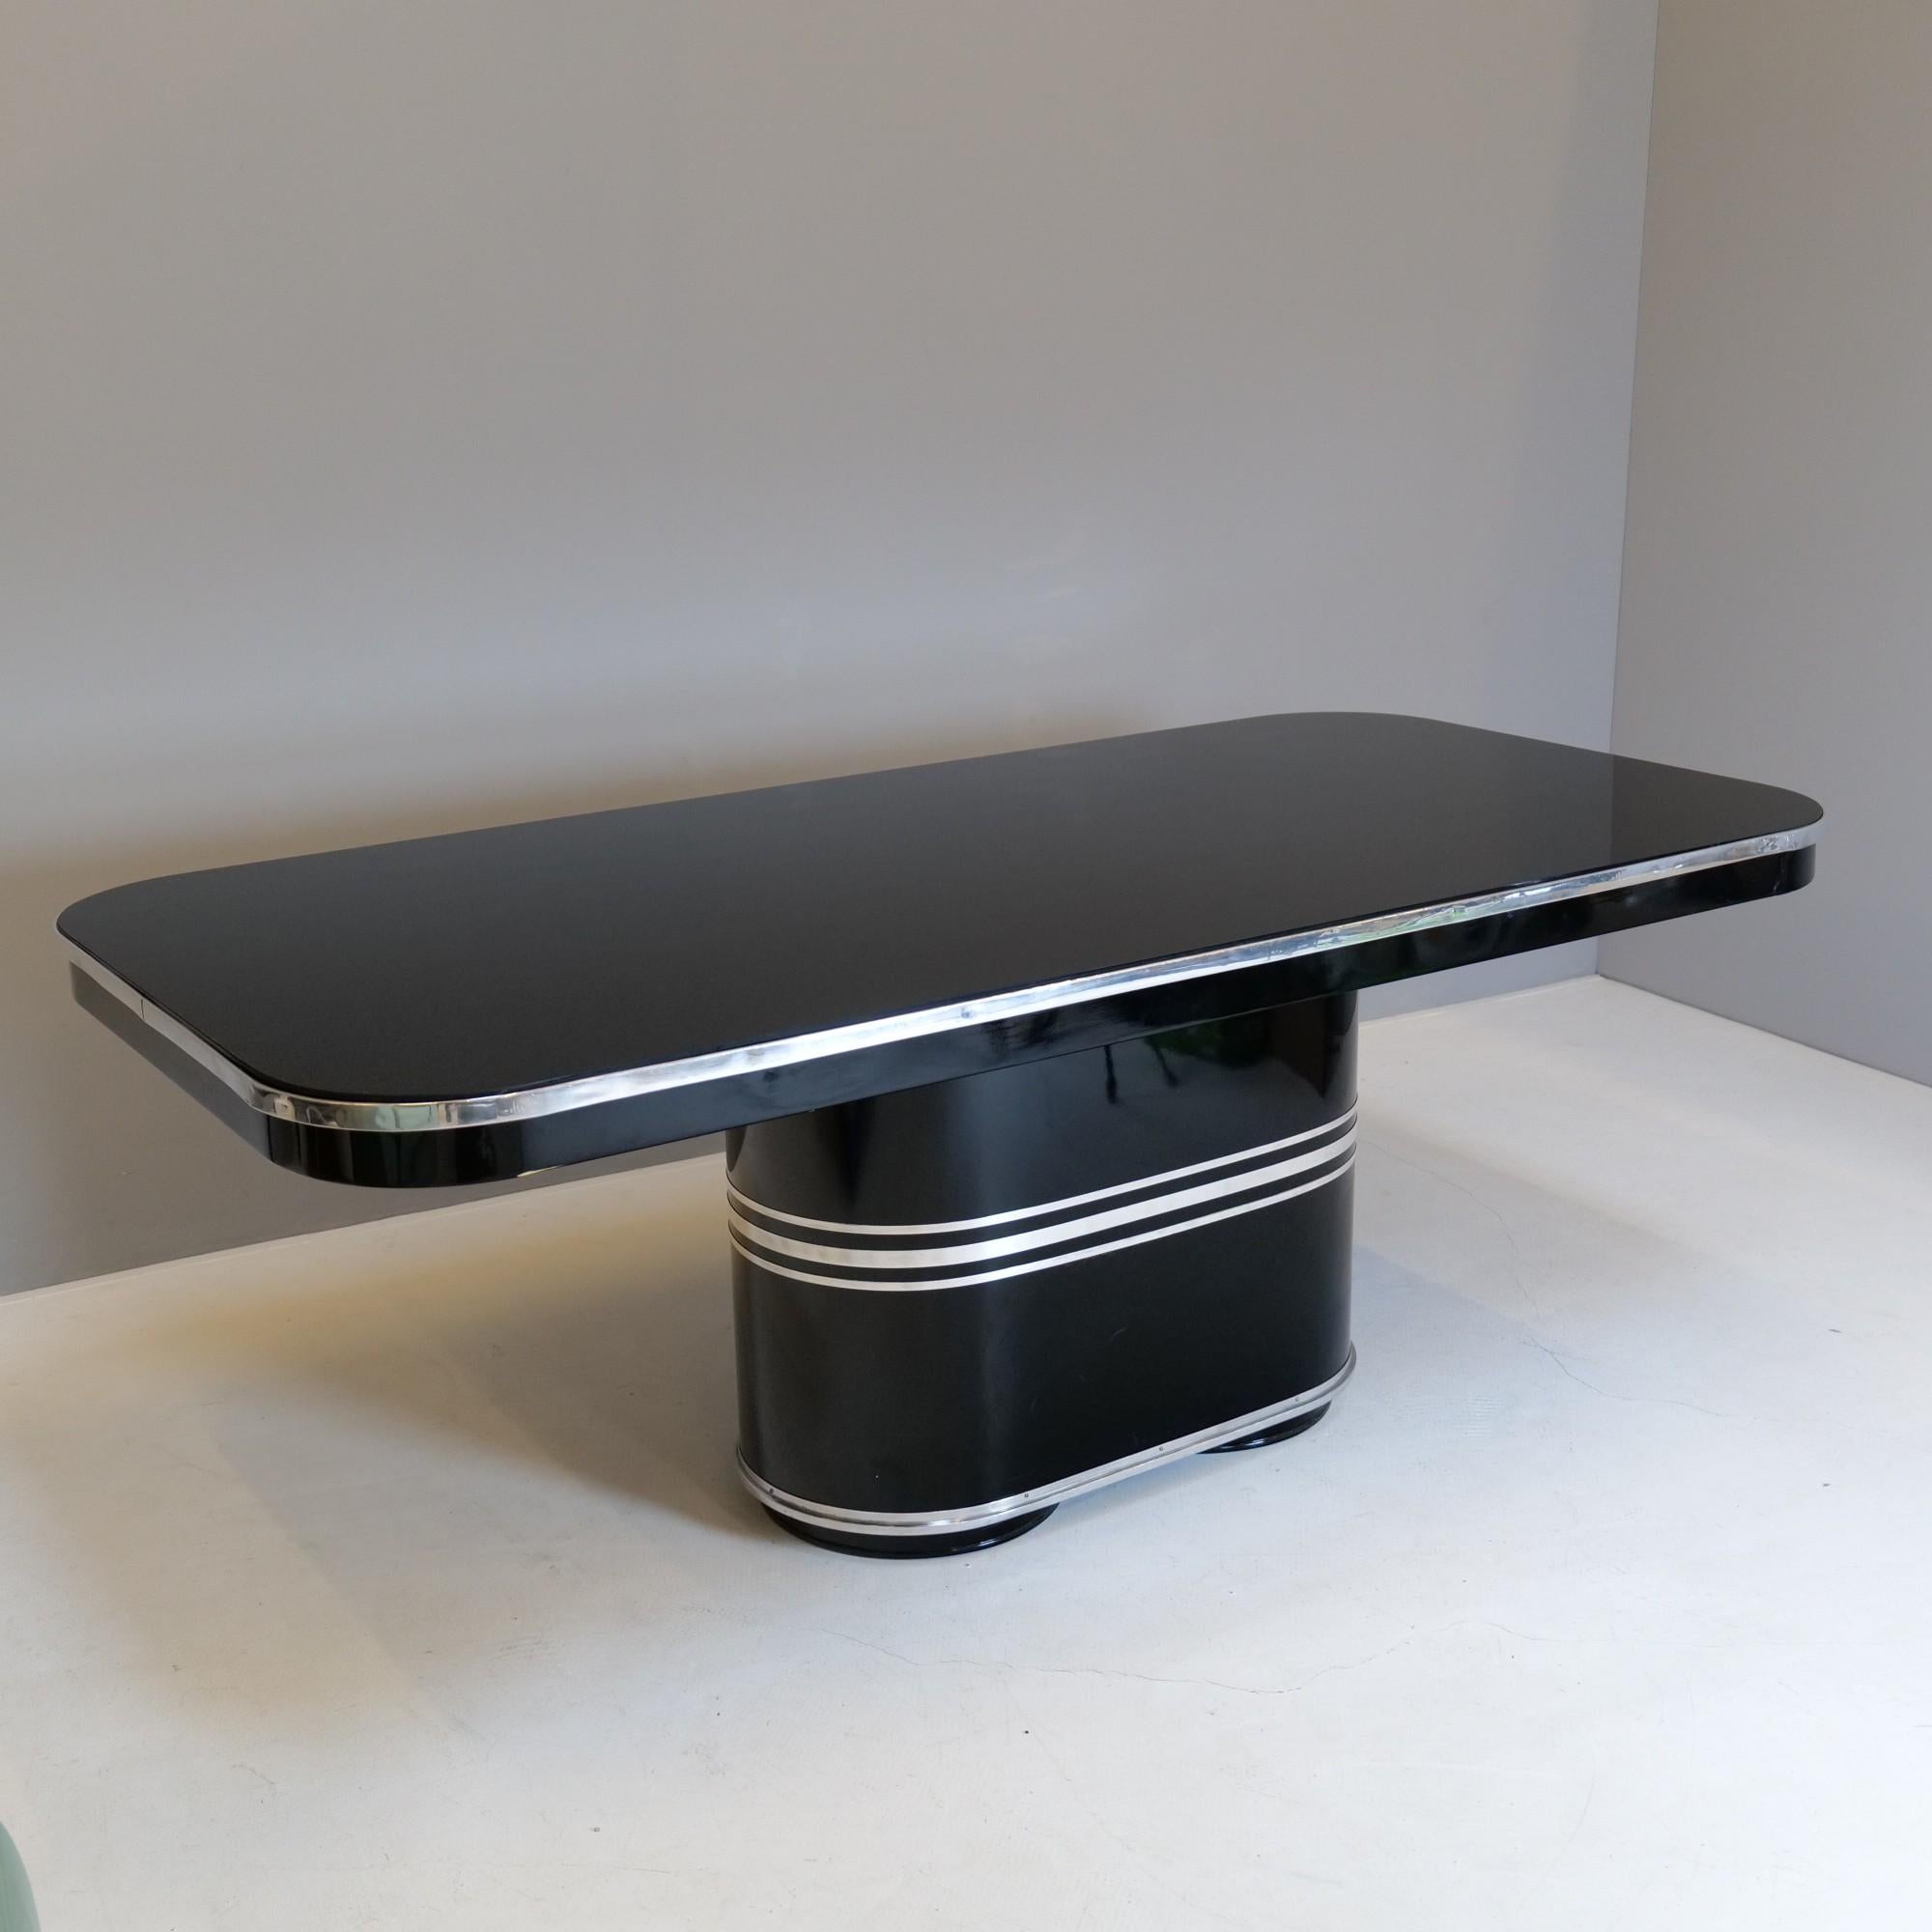 This exceptional streamlined dining table with streamline design is fully made of metal and glass top, which can be every time replaced.
This rare model named 